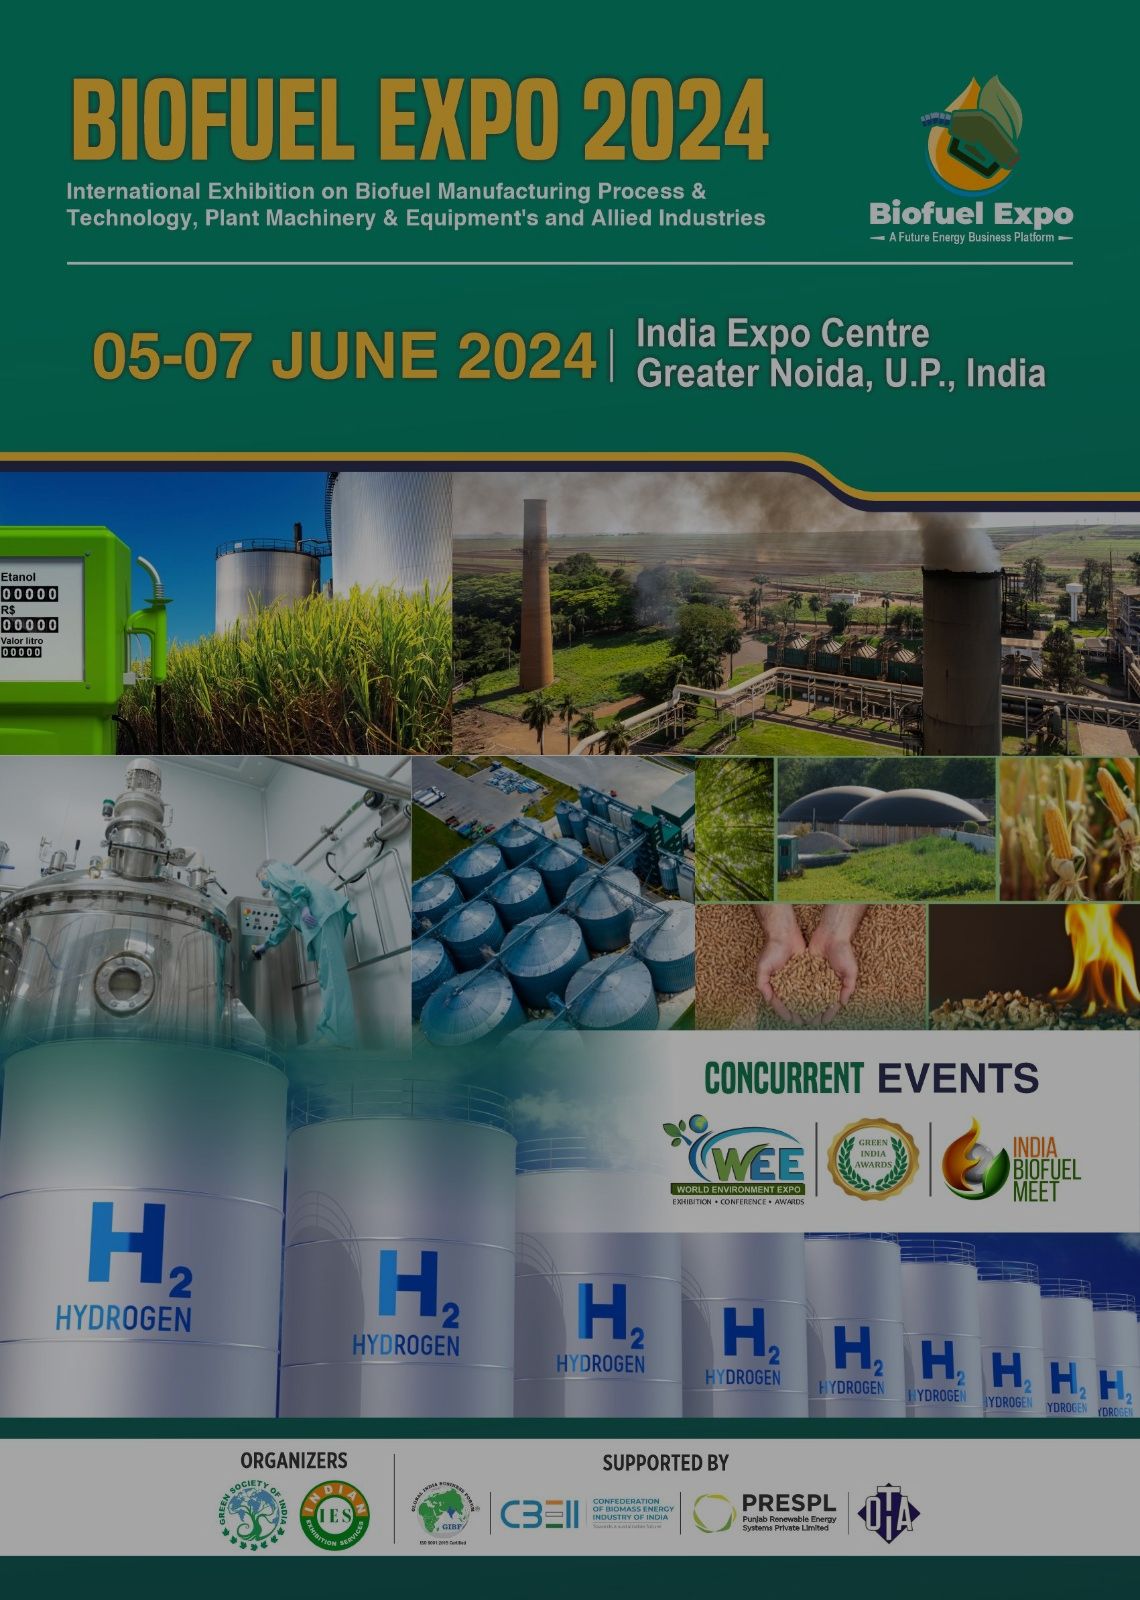 GIBF Collabrative Upcoming Event - Biofuel Expo 2024